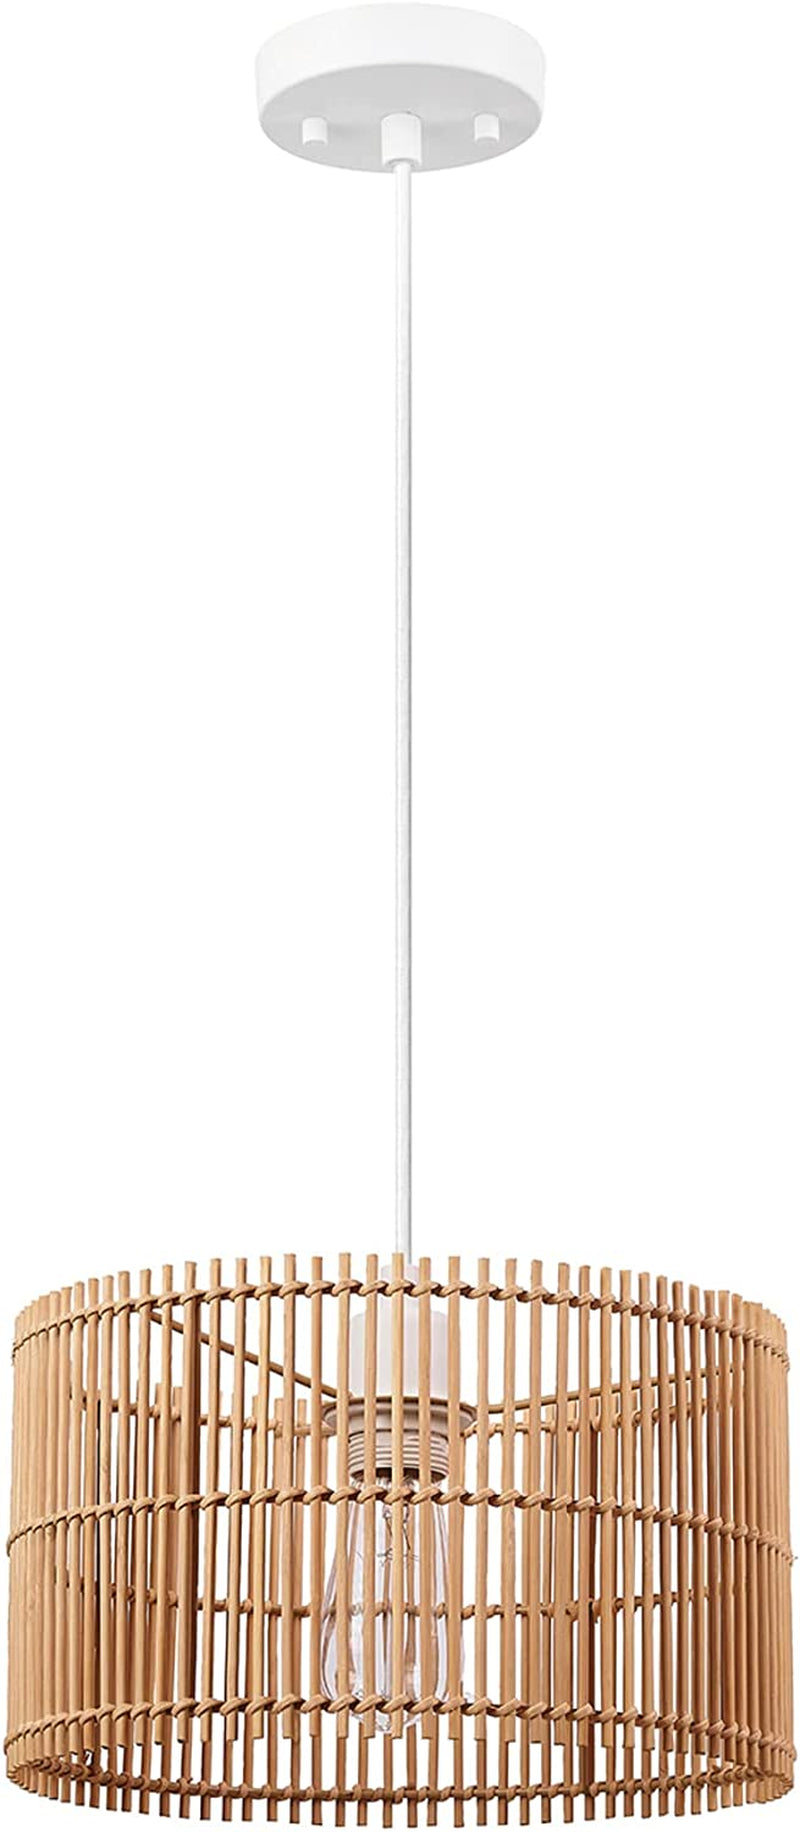 Globe Electric 61090 1-Light Pendant Light, Light Twine Shade, White Socket, White Cloth Hanging Cord, E26 Base Socket, Kitchen Island, Pendant Light Fixture, Adjustable Height, Home Décor Lighting Home & Garden > Lighting > Lighting Fixtures Globe Electric Tammi Without Bulb 